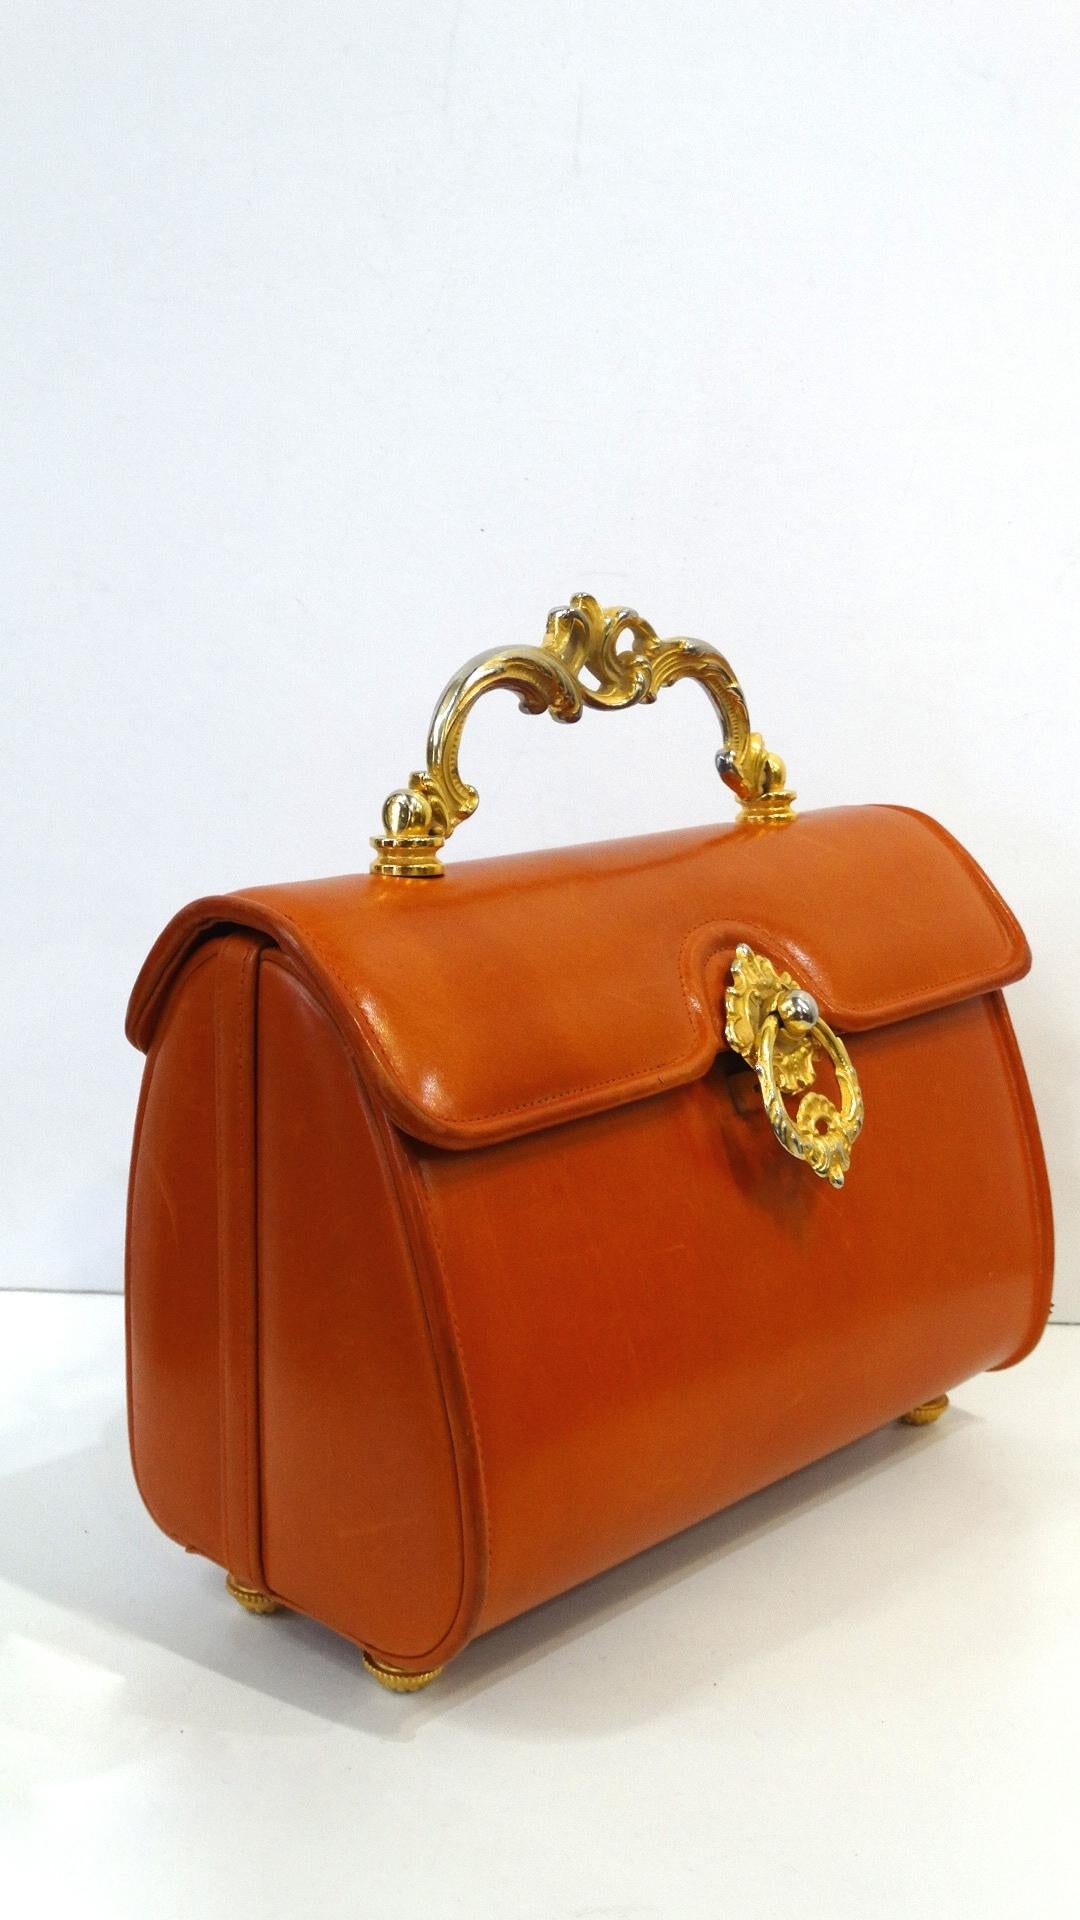 The Most Adorable Bag Is Here And It Screams Vintage! Circa 1950s, this Netti Rosenstein leather barrel bag is a beautiful burnt orange color and features Victorian/Baroque style gold plated hardware. Includes engraved feet on the bottom and a